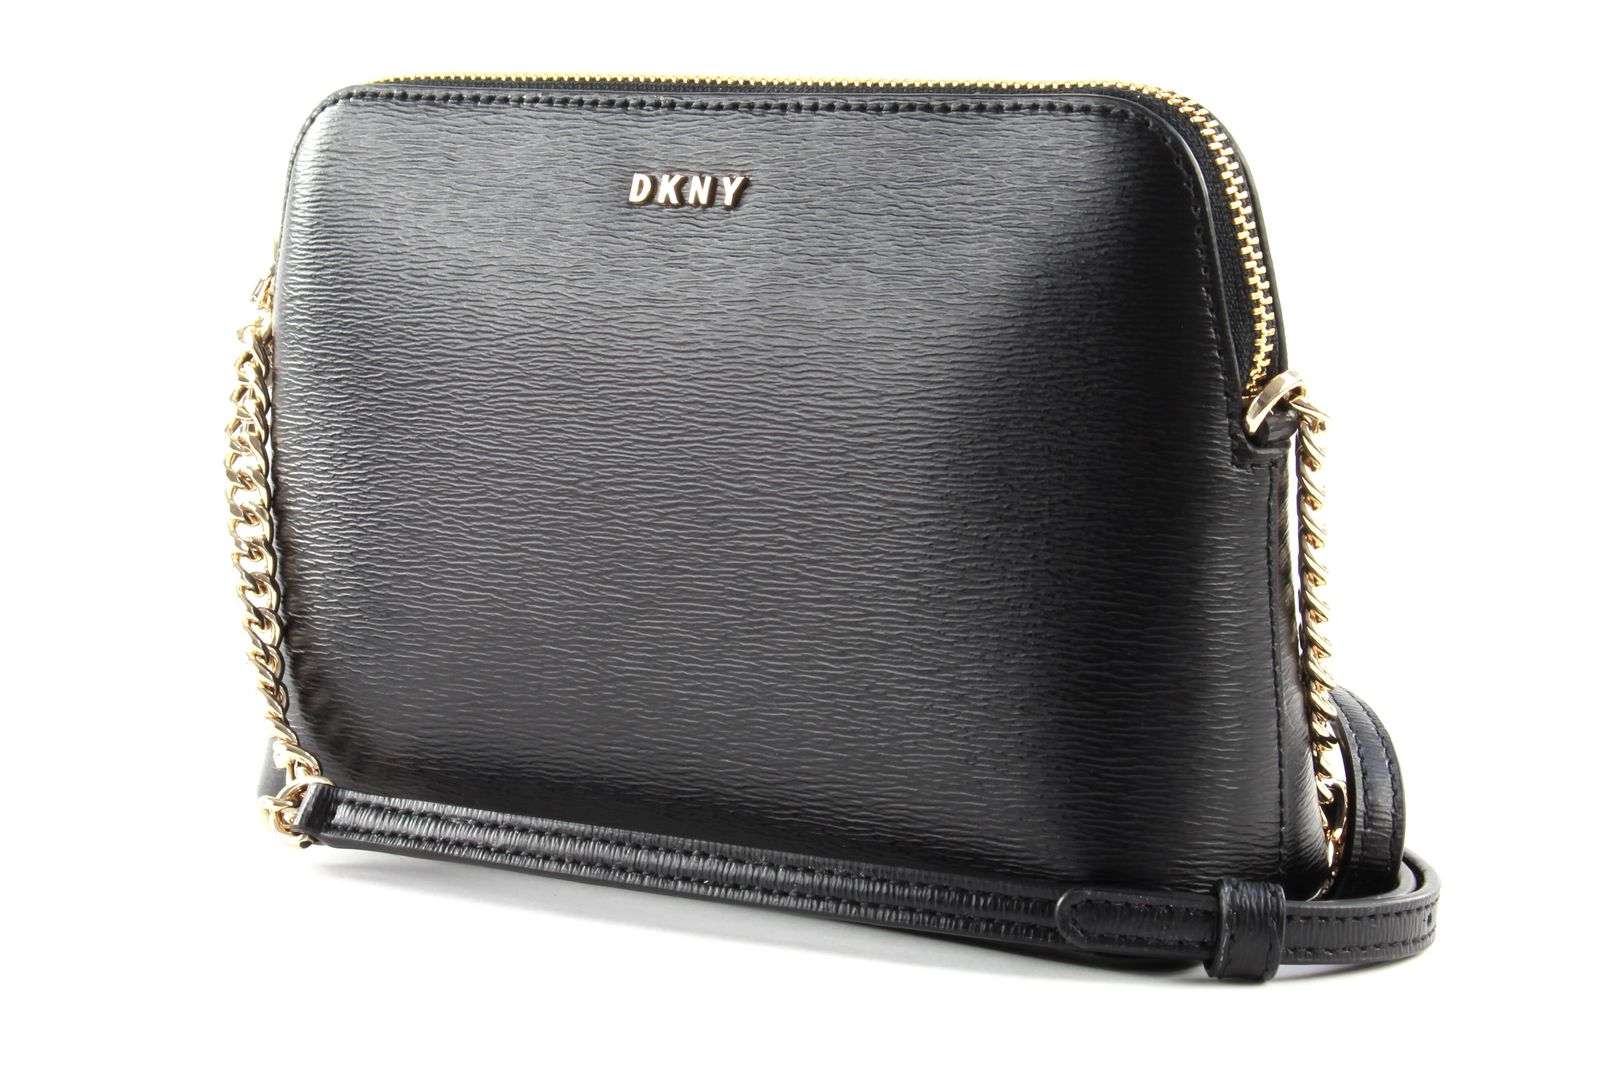 Dkny Lexington Dome Quilted Crossbody - Black/Gold